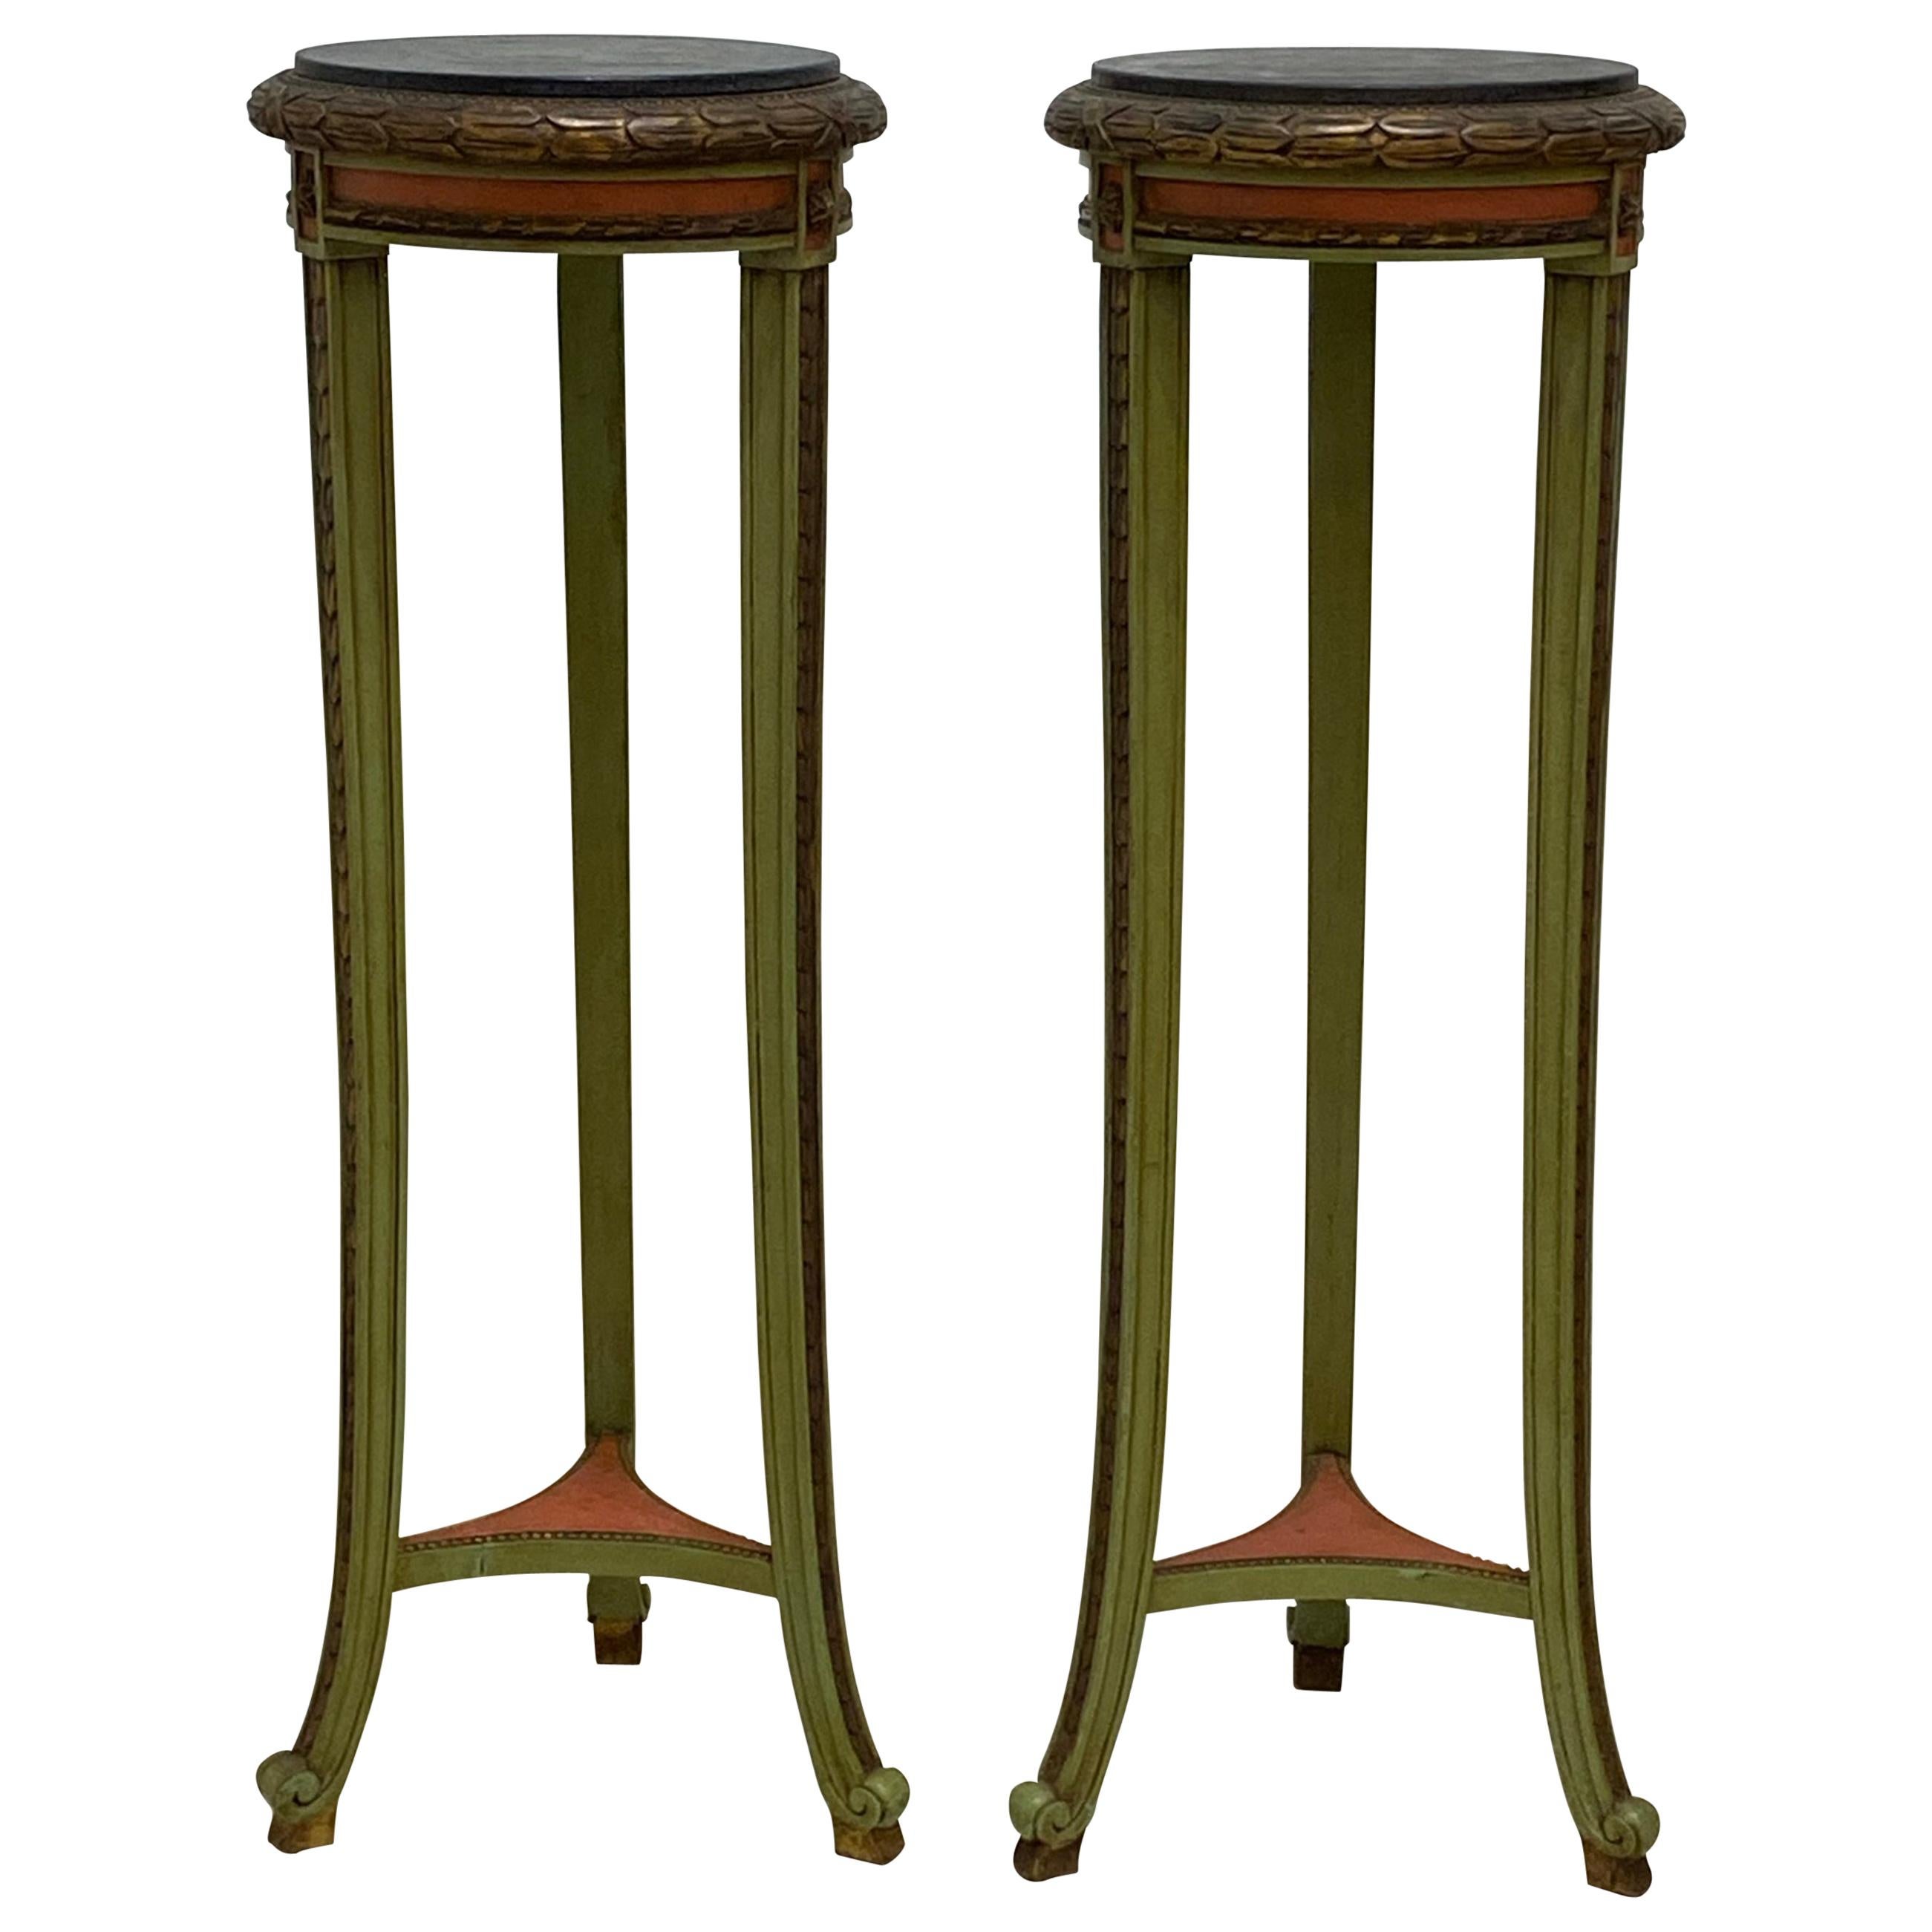 Tall Display Pedestals or Plant Stands, a Pair For Sale at 1stDibs